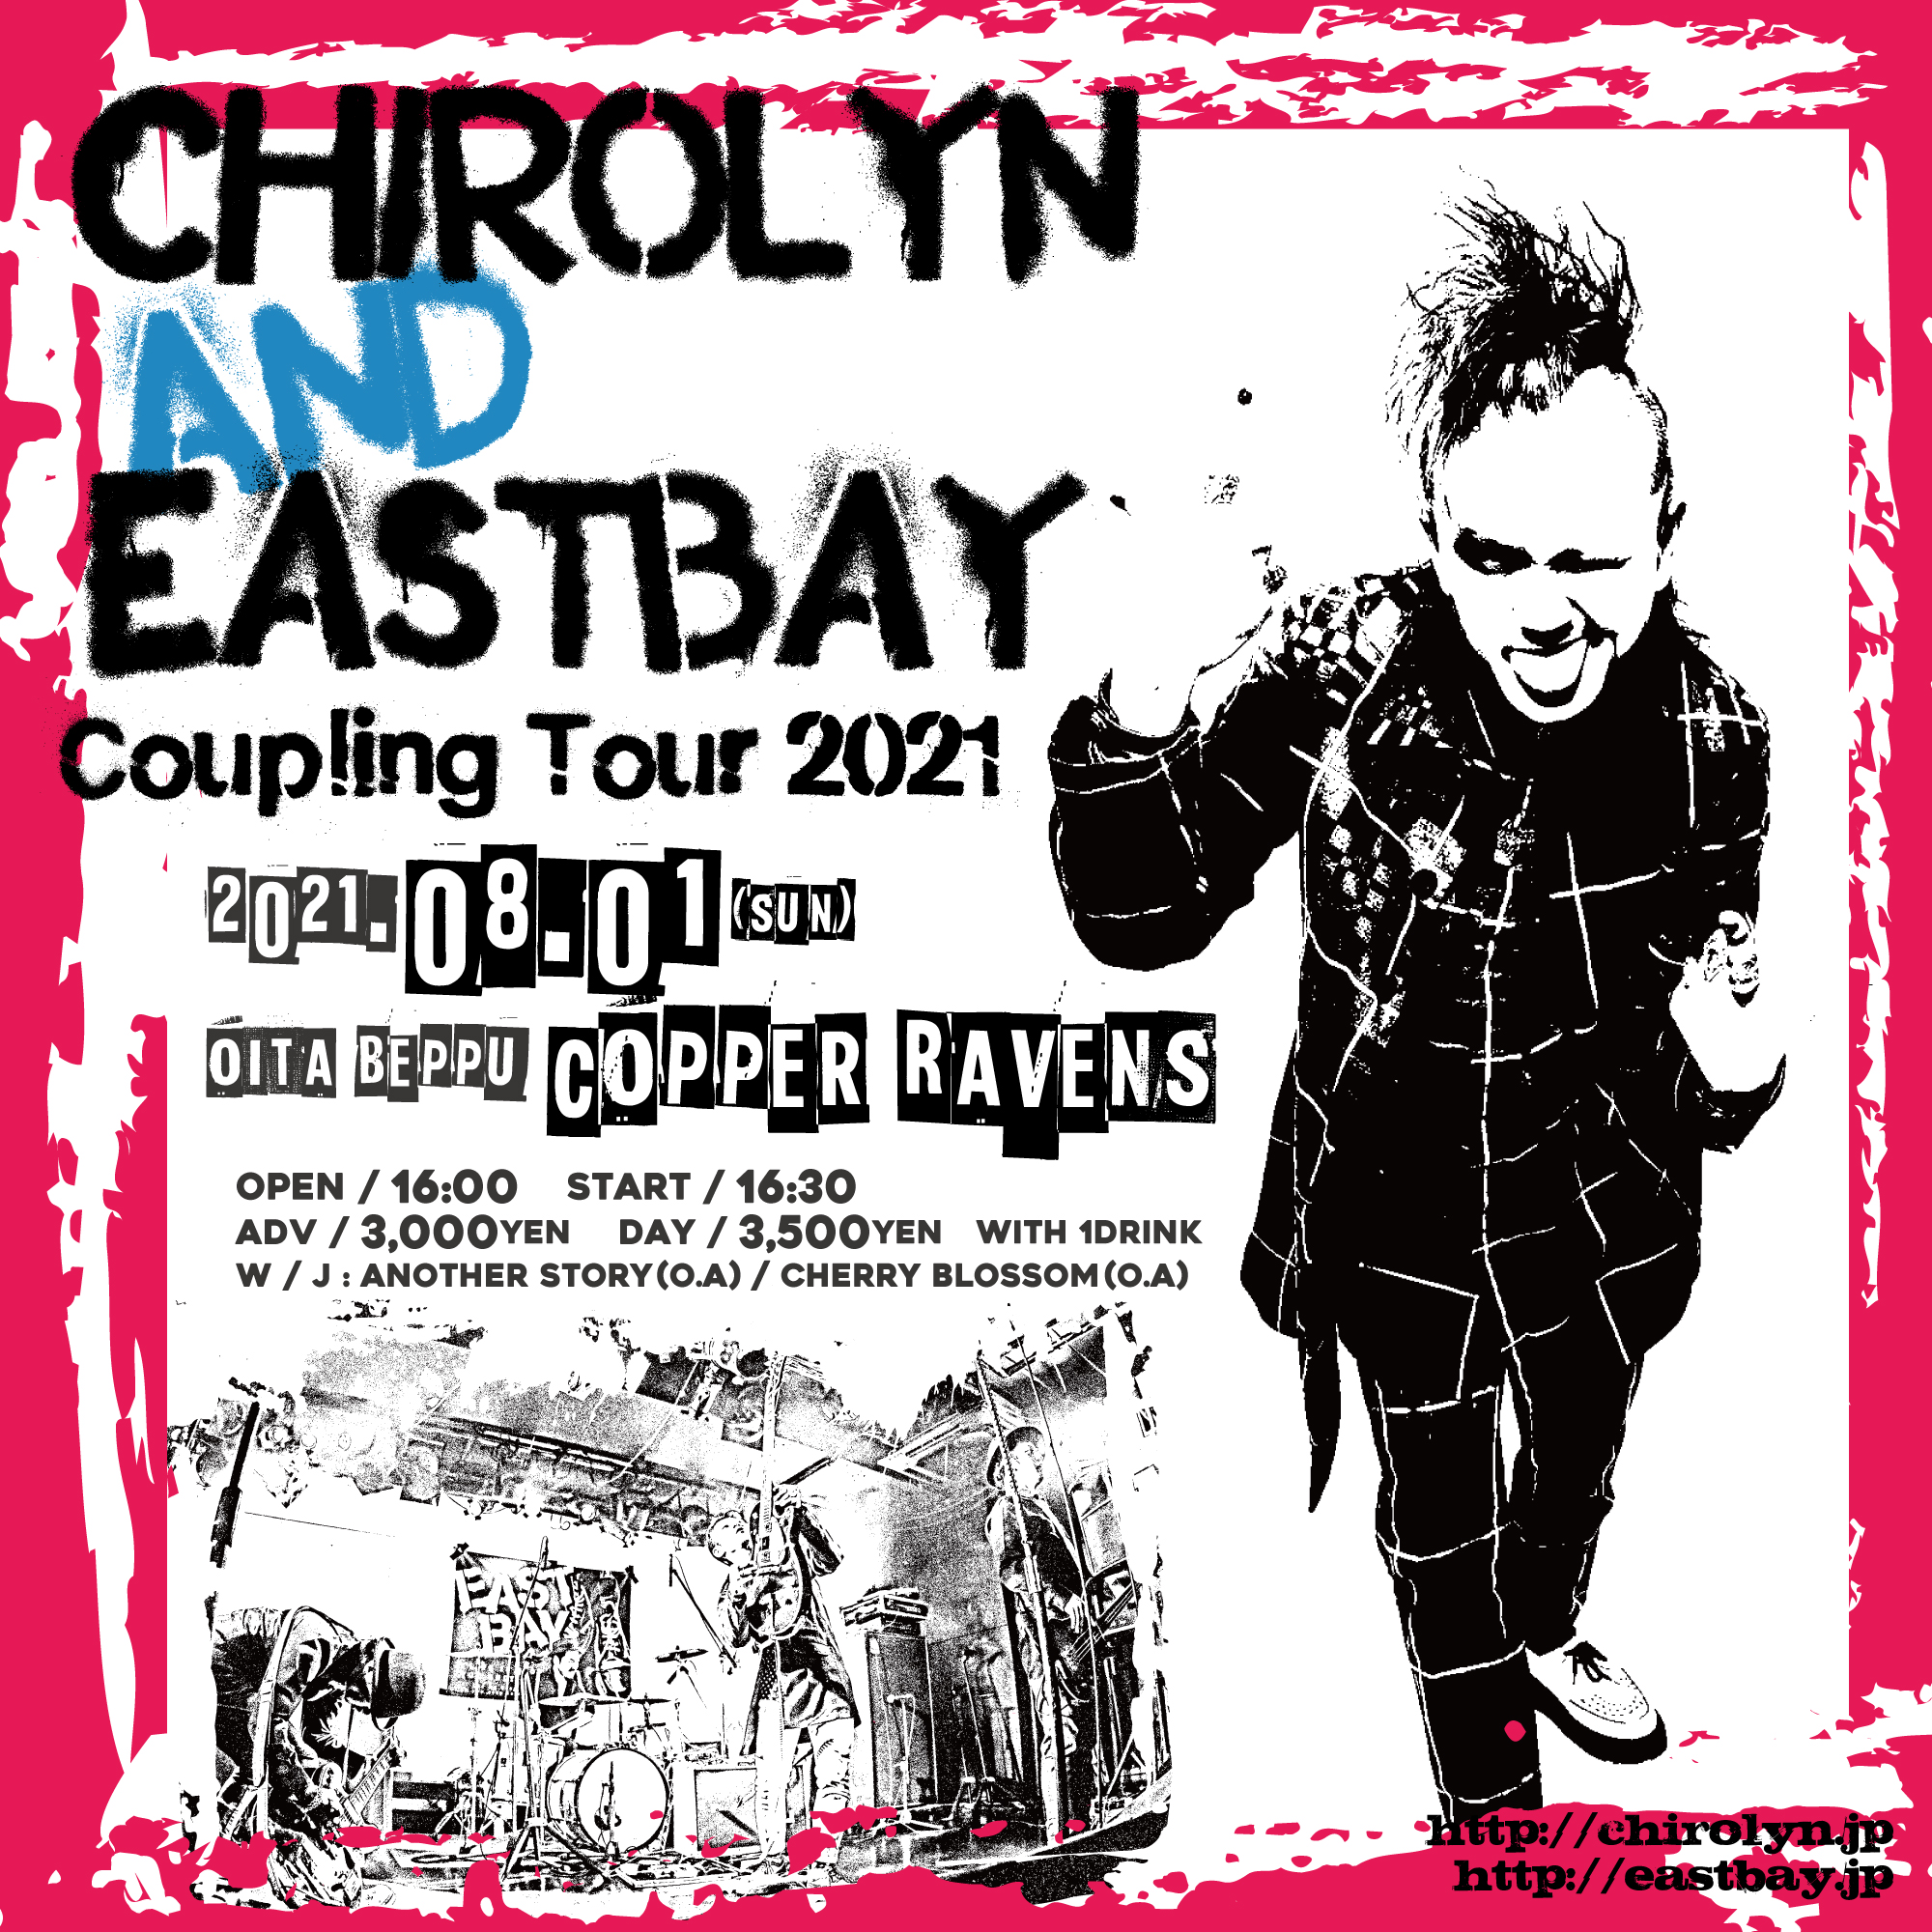 Chirolyn & EASTBAY Coupling Tour 2021 in 別府の写真